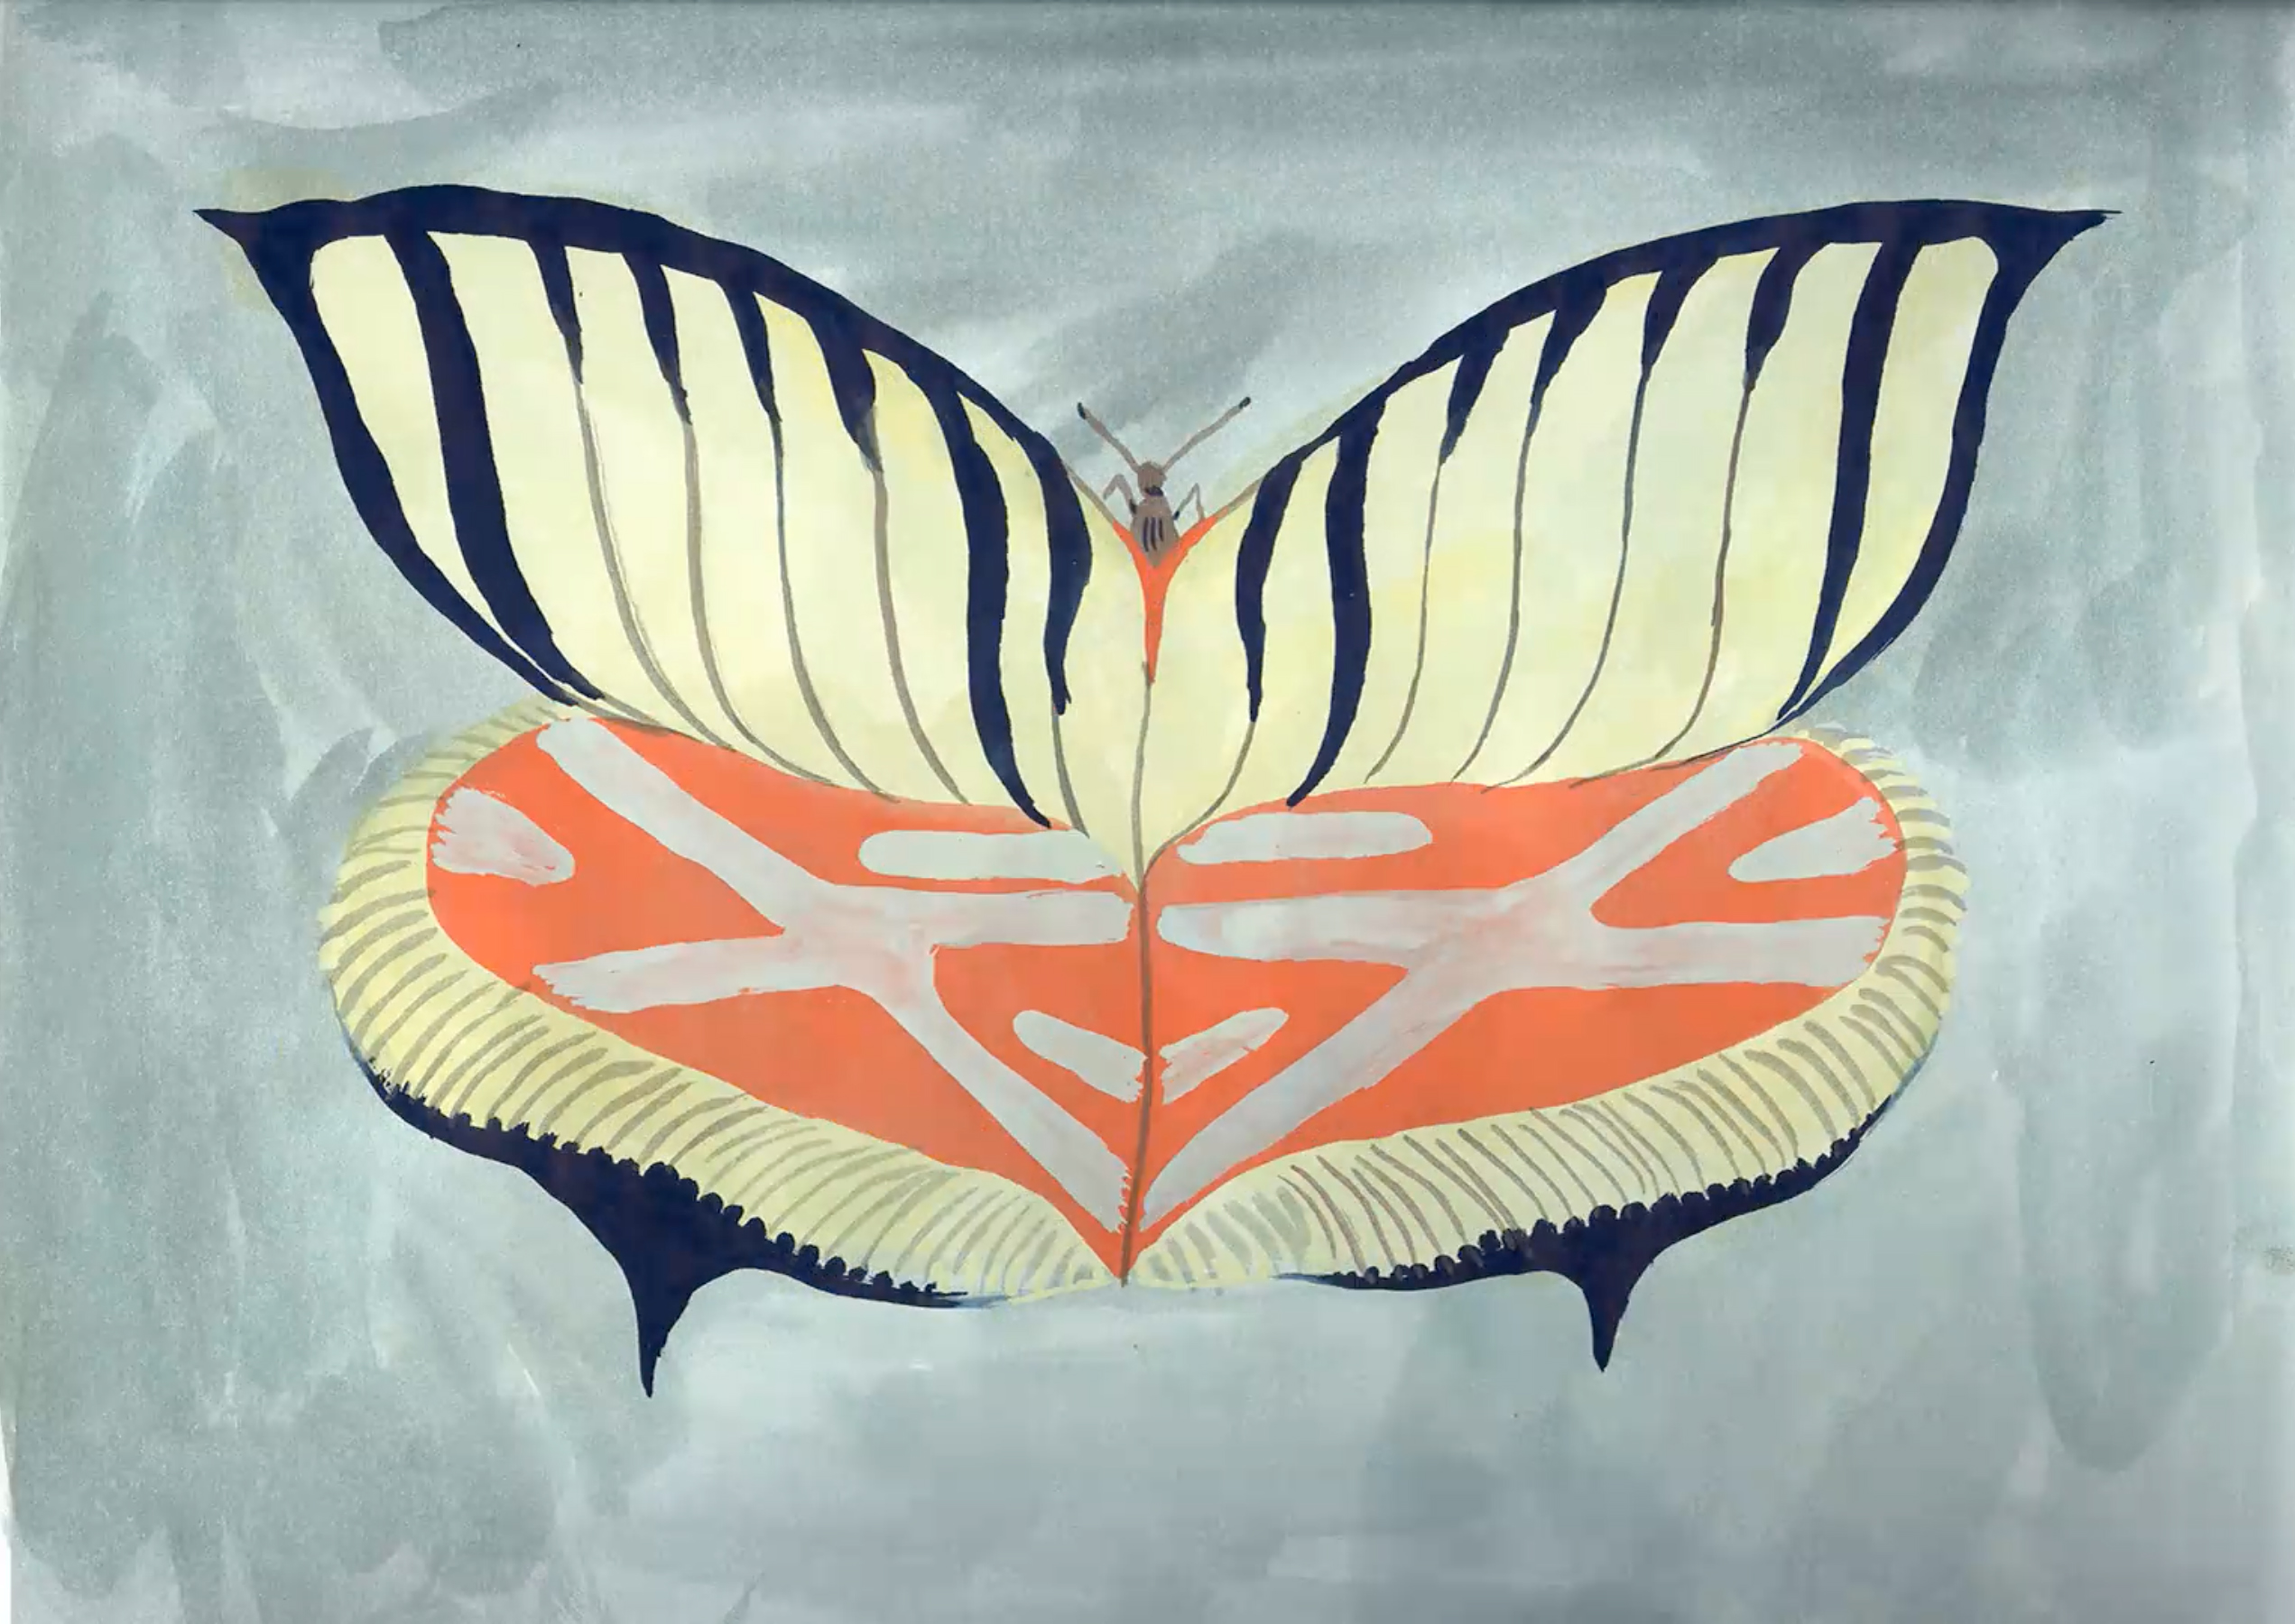 A still from Allison Schulnik's video "Moth" which is a hand drawn and hand painted moth on the screen.